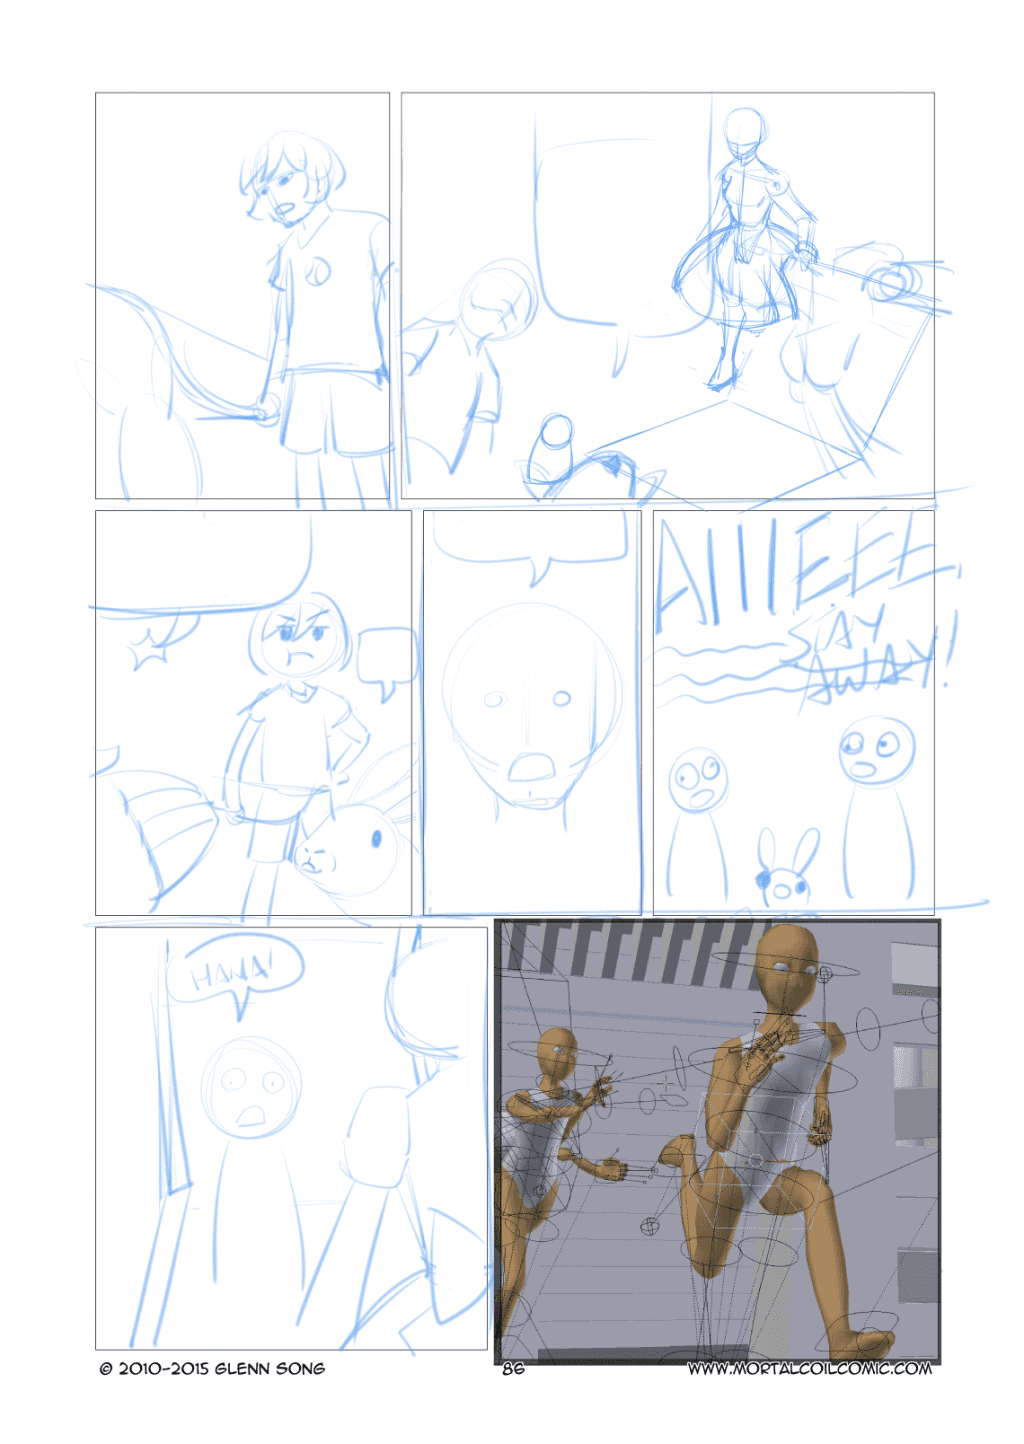 A Voice in the Woods - 3 Storyboards